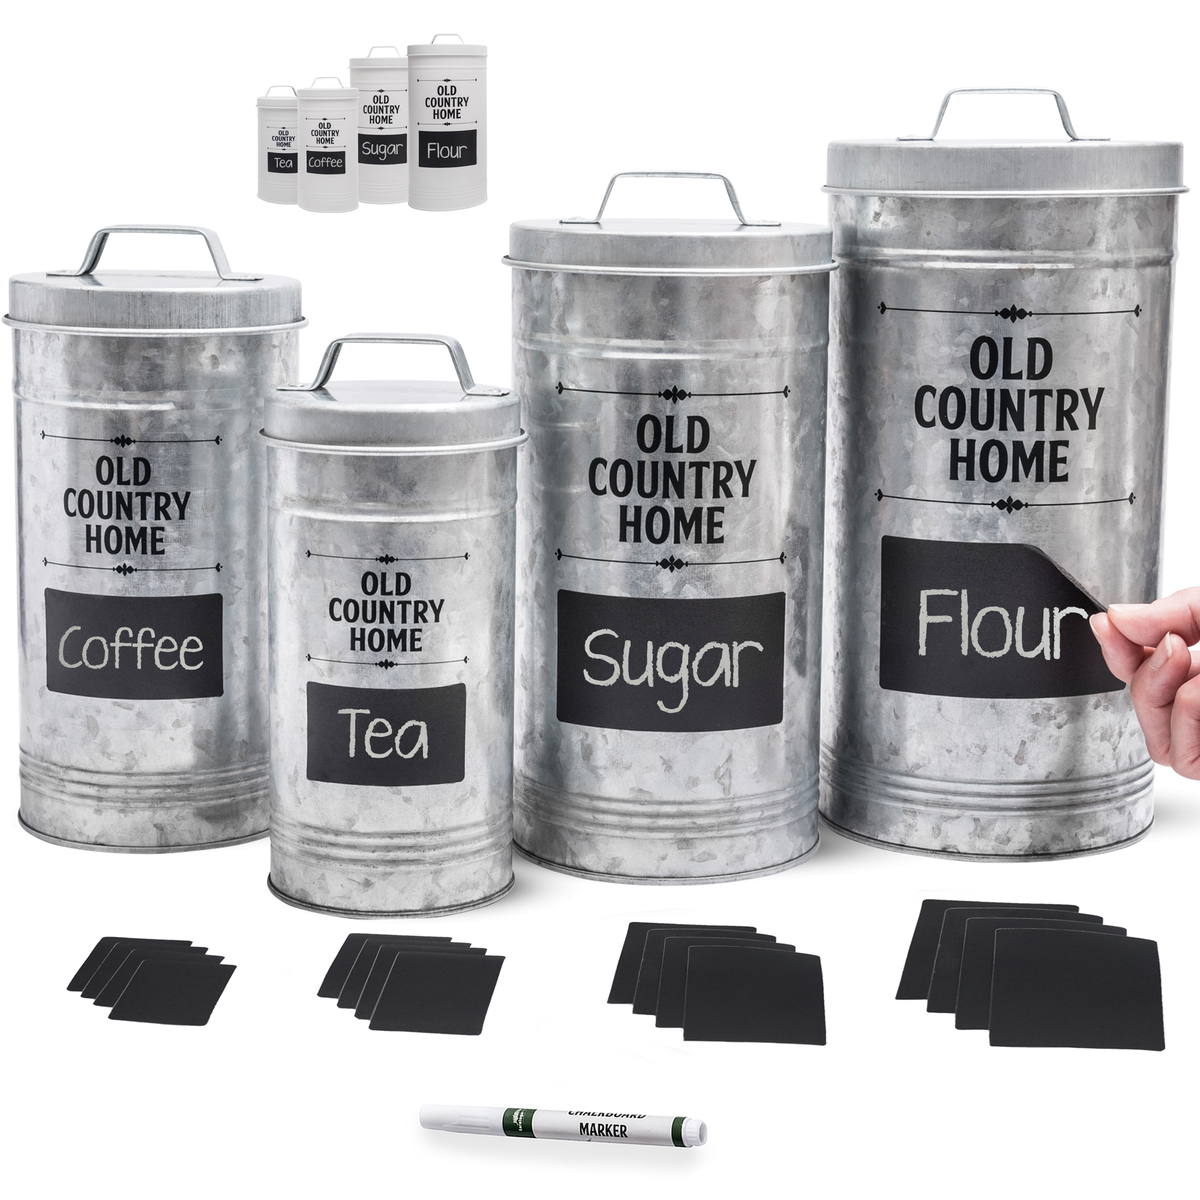 Galvanized Nesting Canisters set by Saratoga Home with 16 labels and chalkboard marker